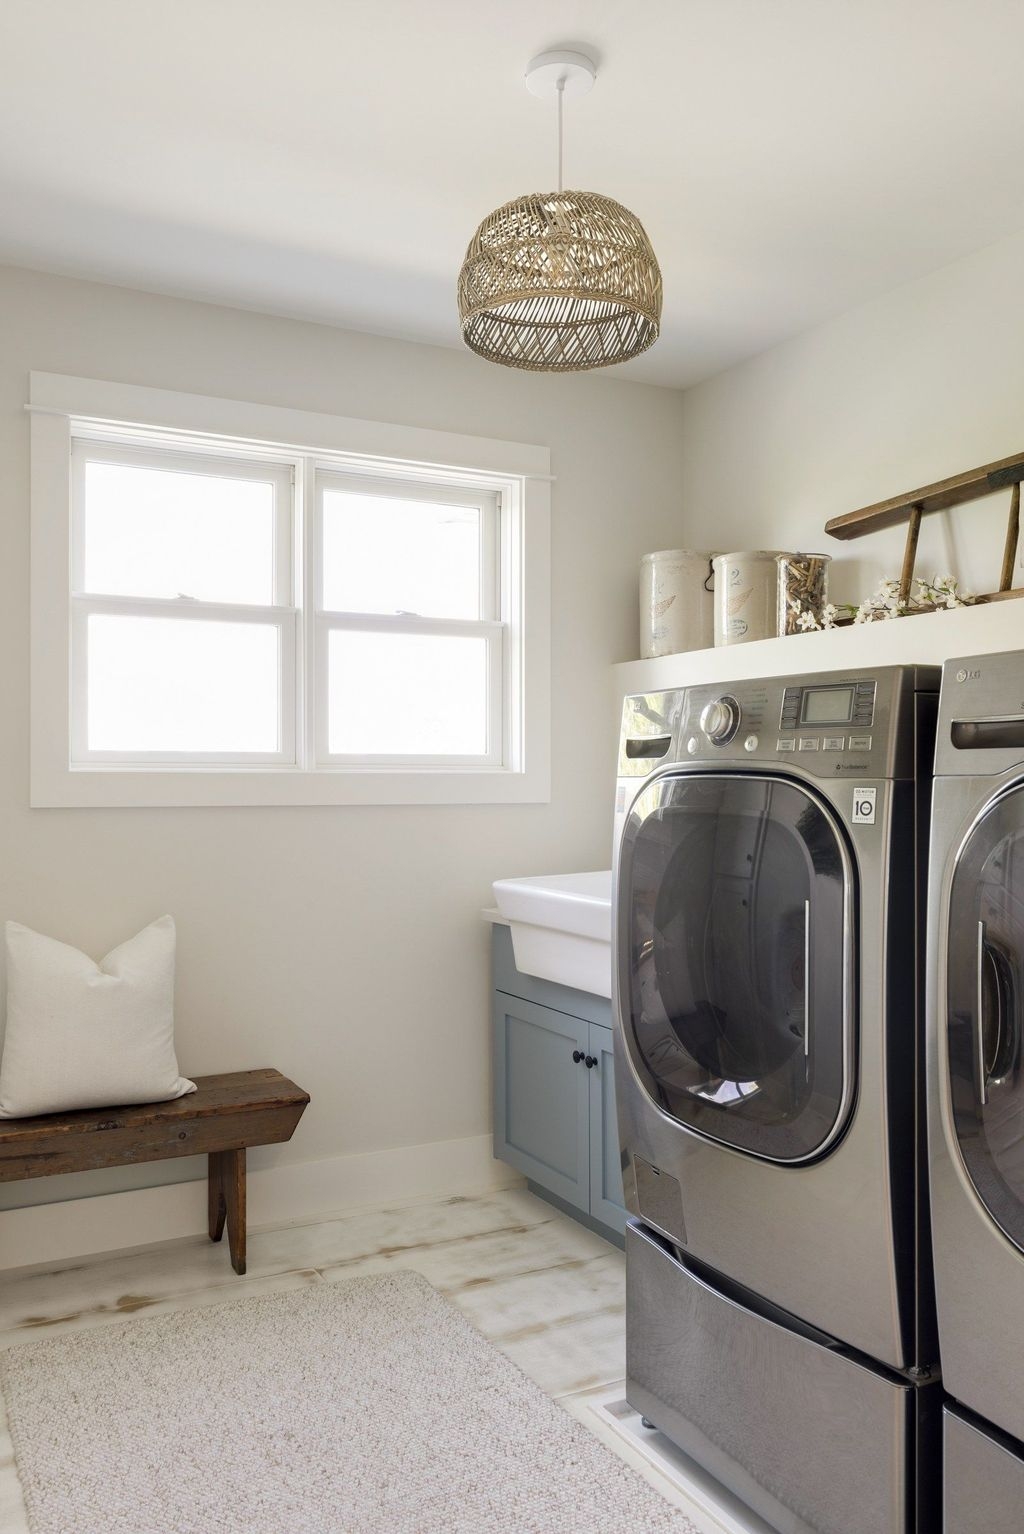 Inspiring Laundry Room Design With French Country Style 38